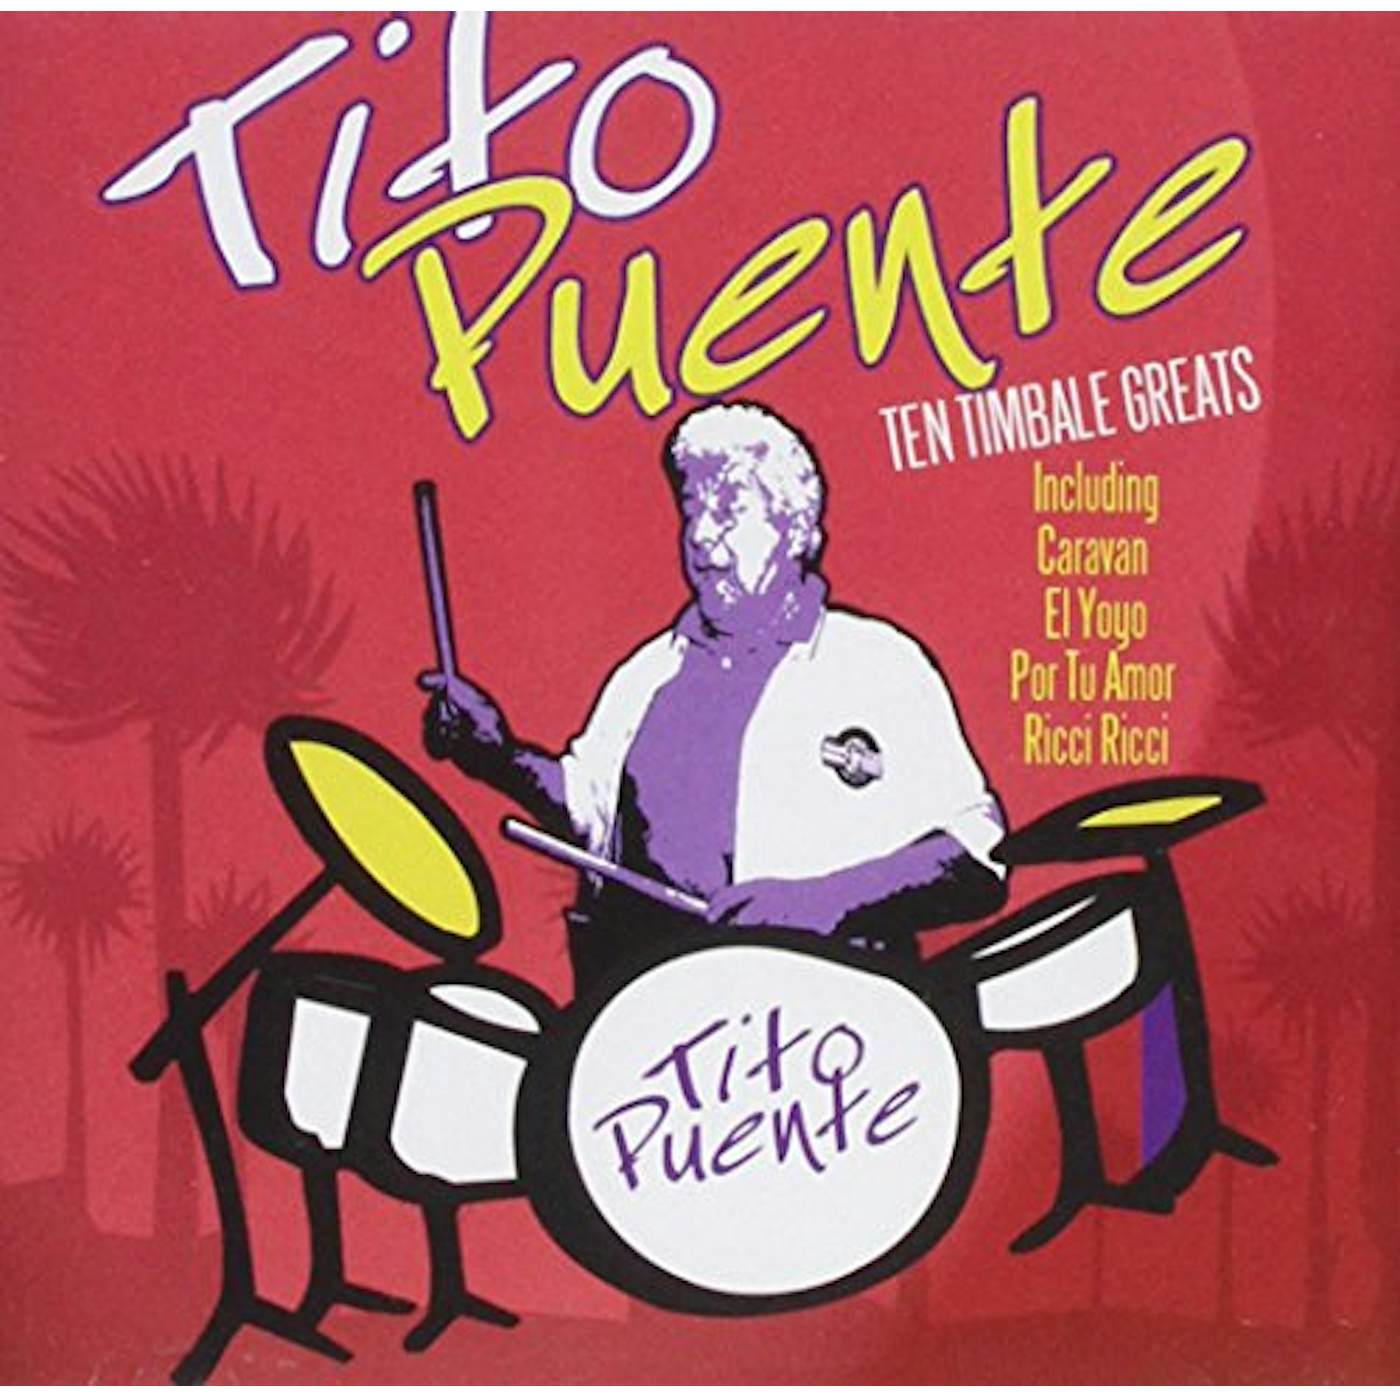 Tito Puente TEN TIMBALE GREATS CD